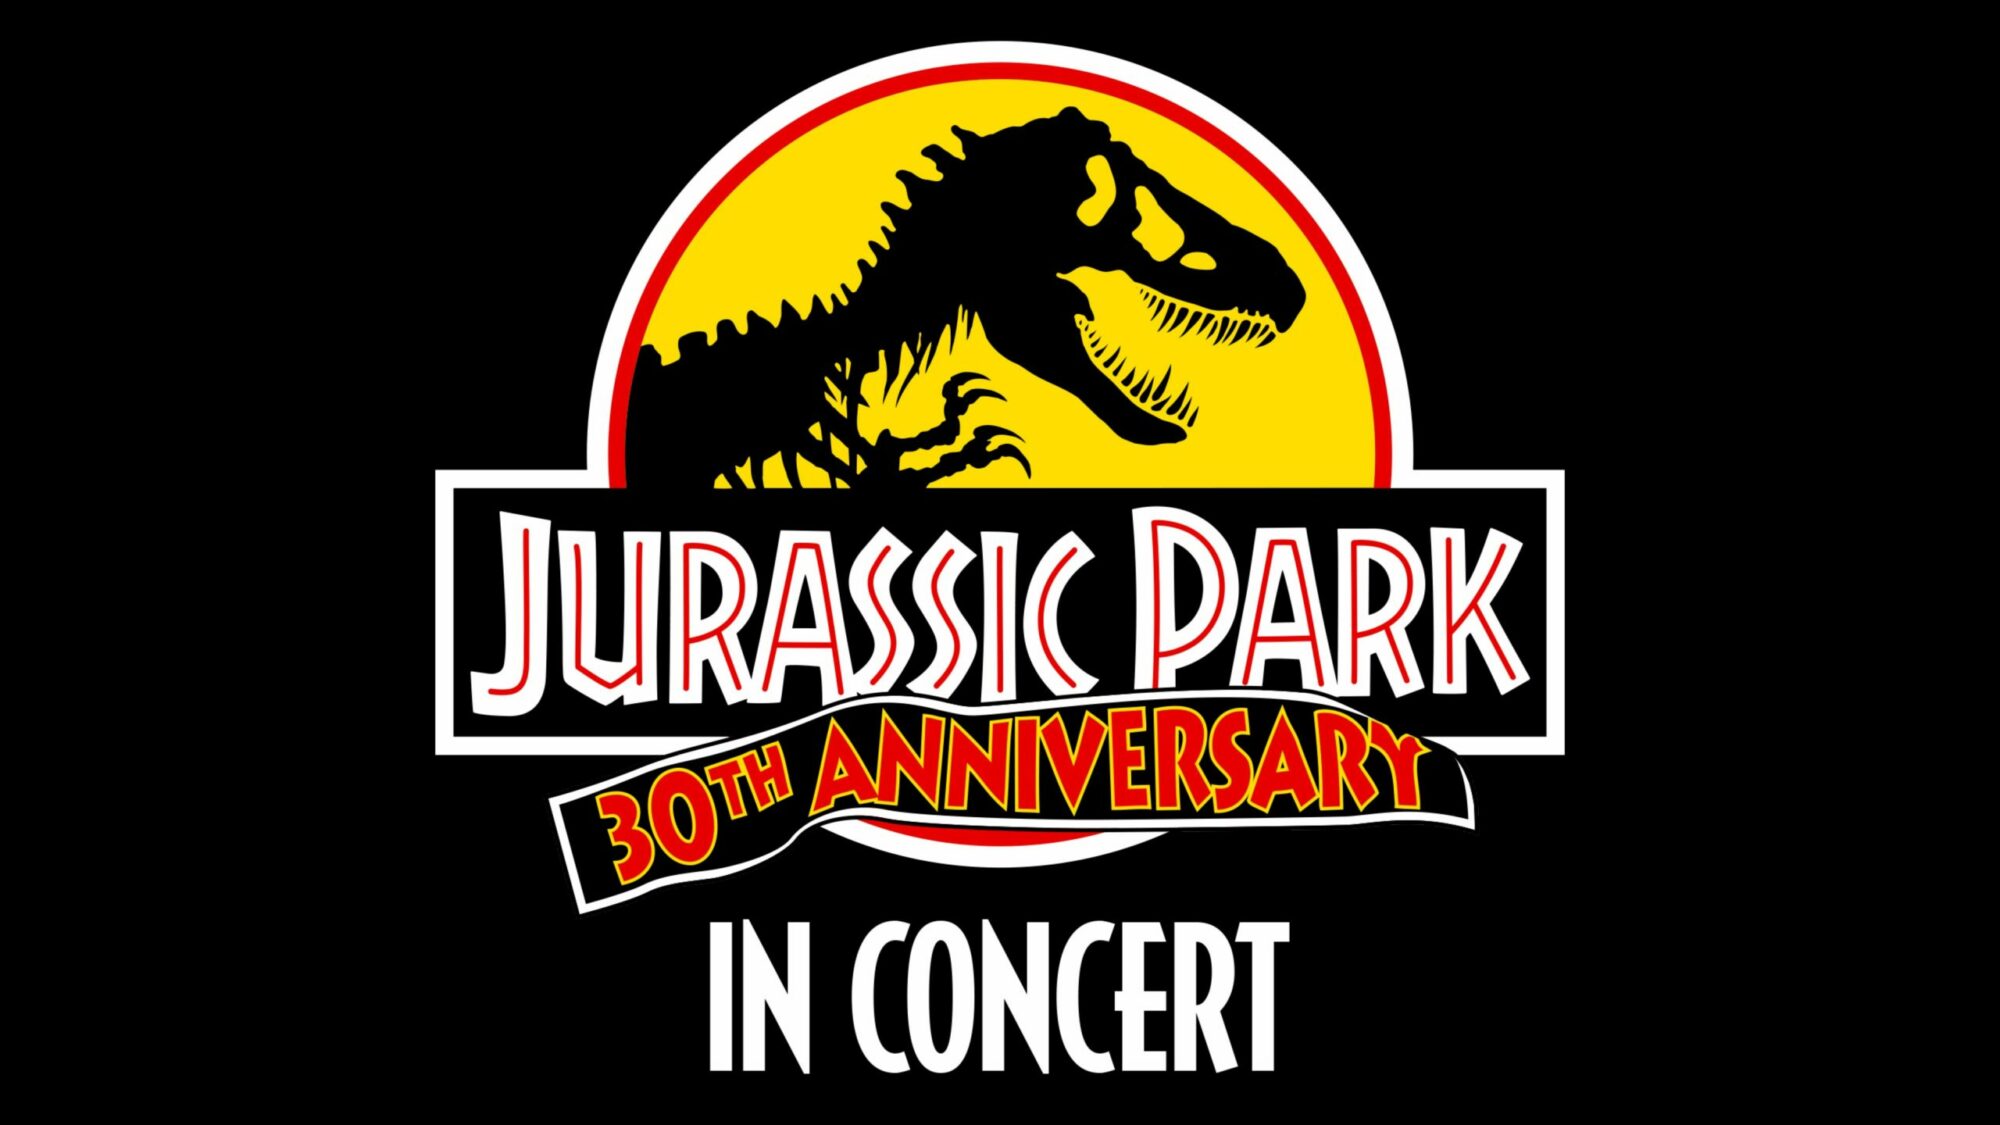 Image name Jurassic Park in Concert Premium Package The Luxury Experience at First Direct Arena Leeds scaled the 12 image from the post Jurassic Park In Concert - 30th Anniversary at First Direct Arena, Leeds in Yorkshire.com.